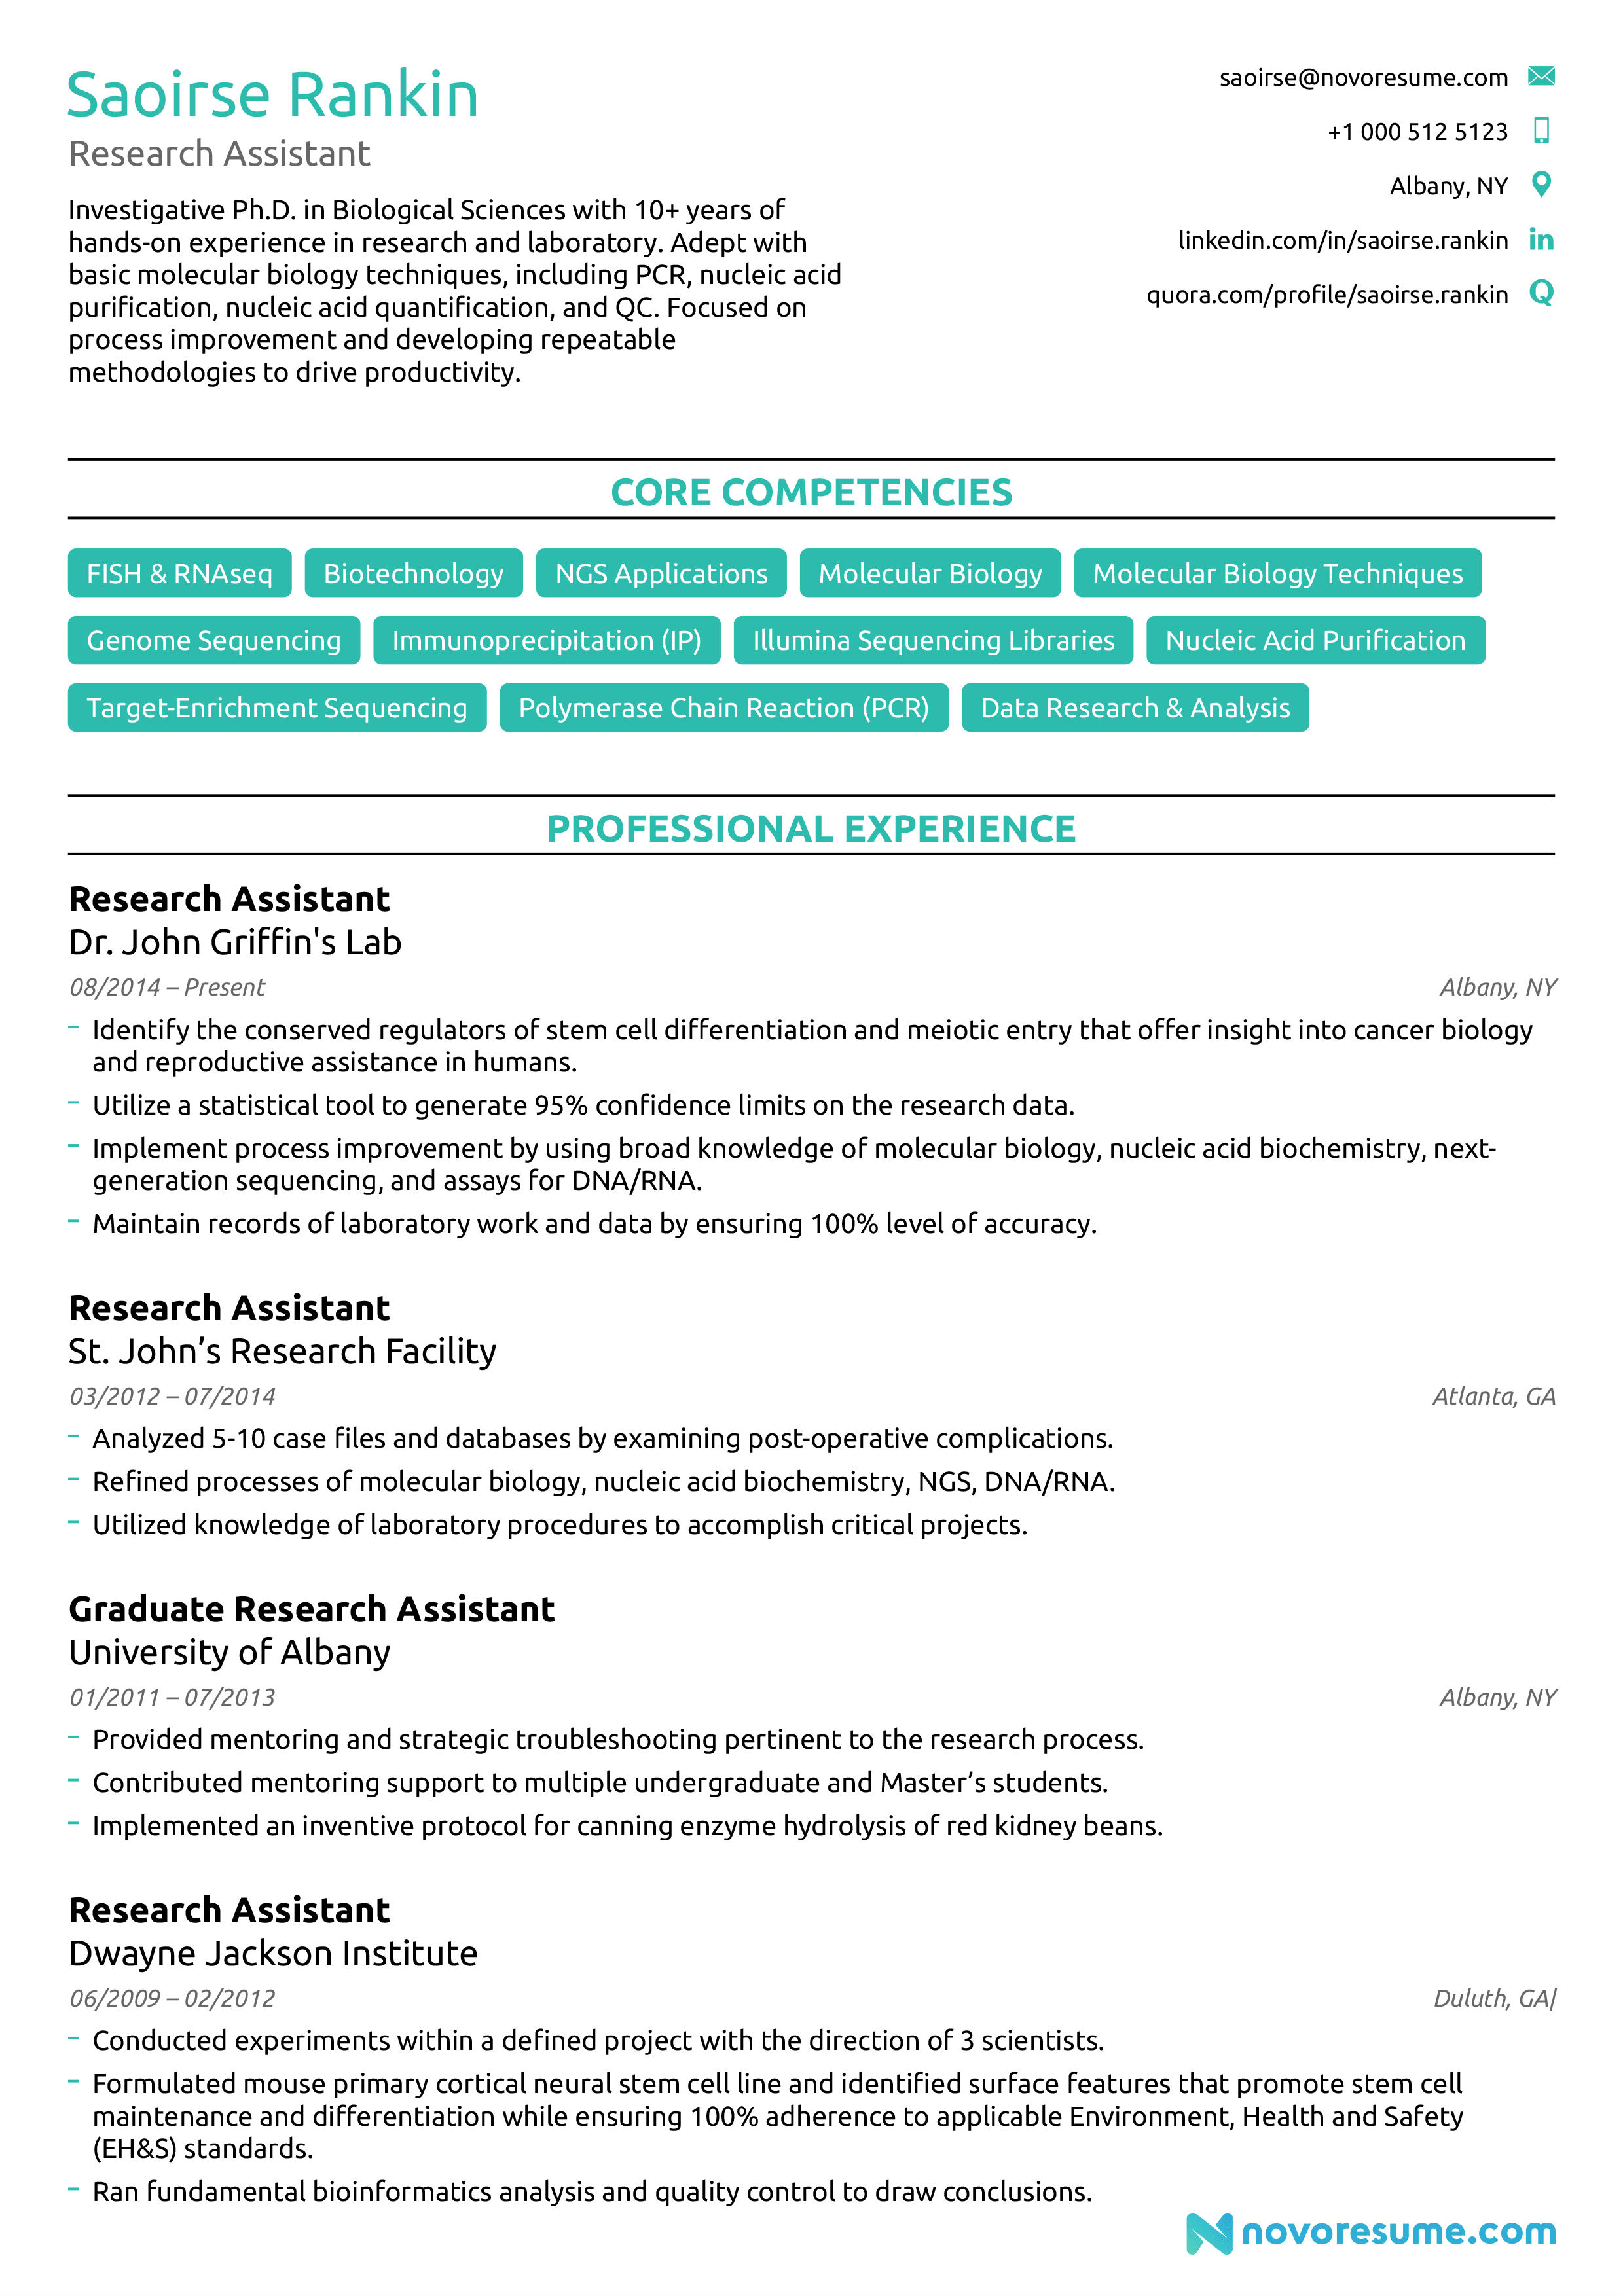 Research Assistant resume example